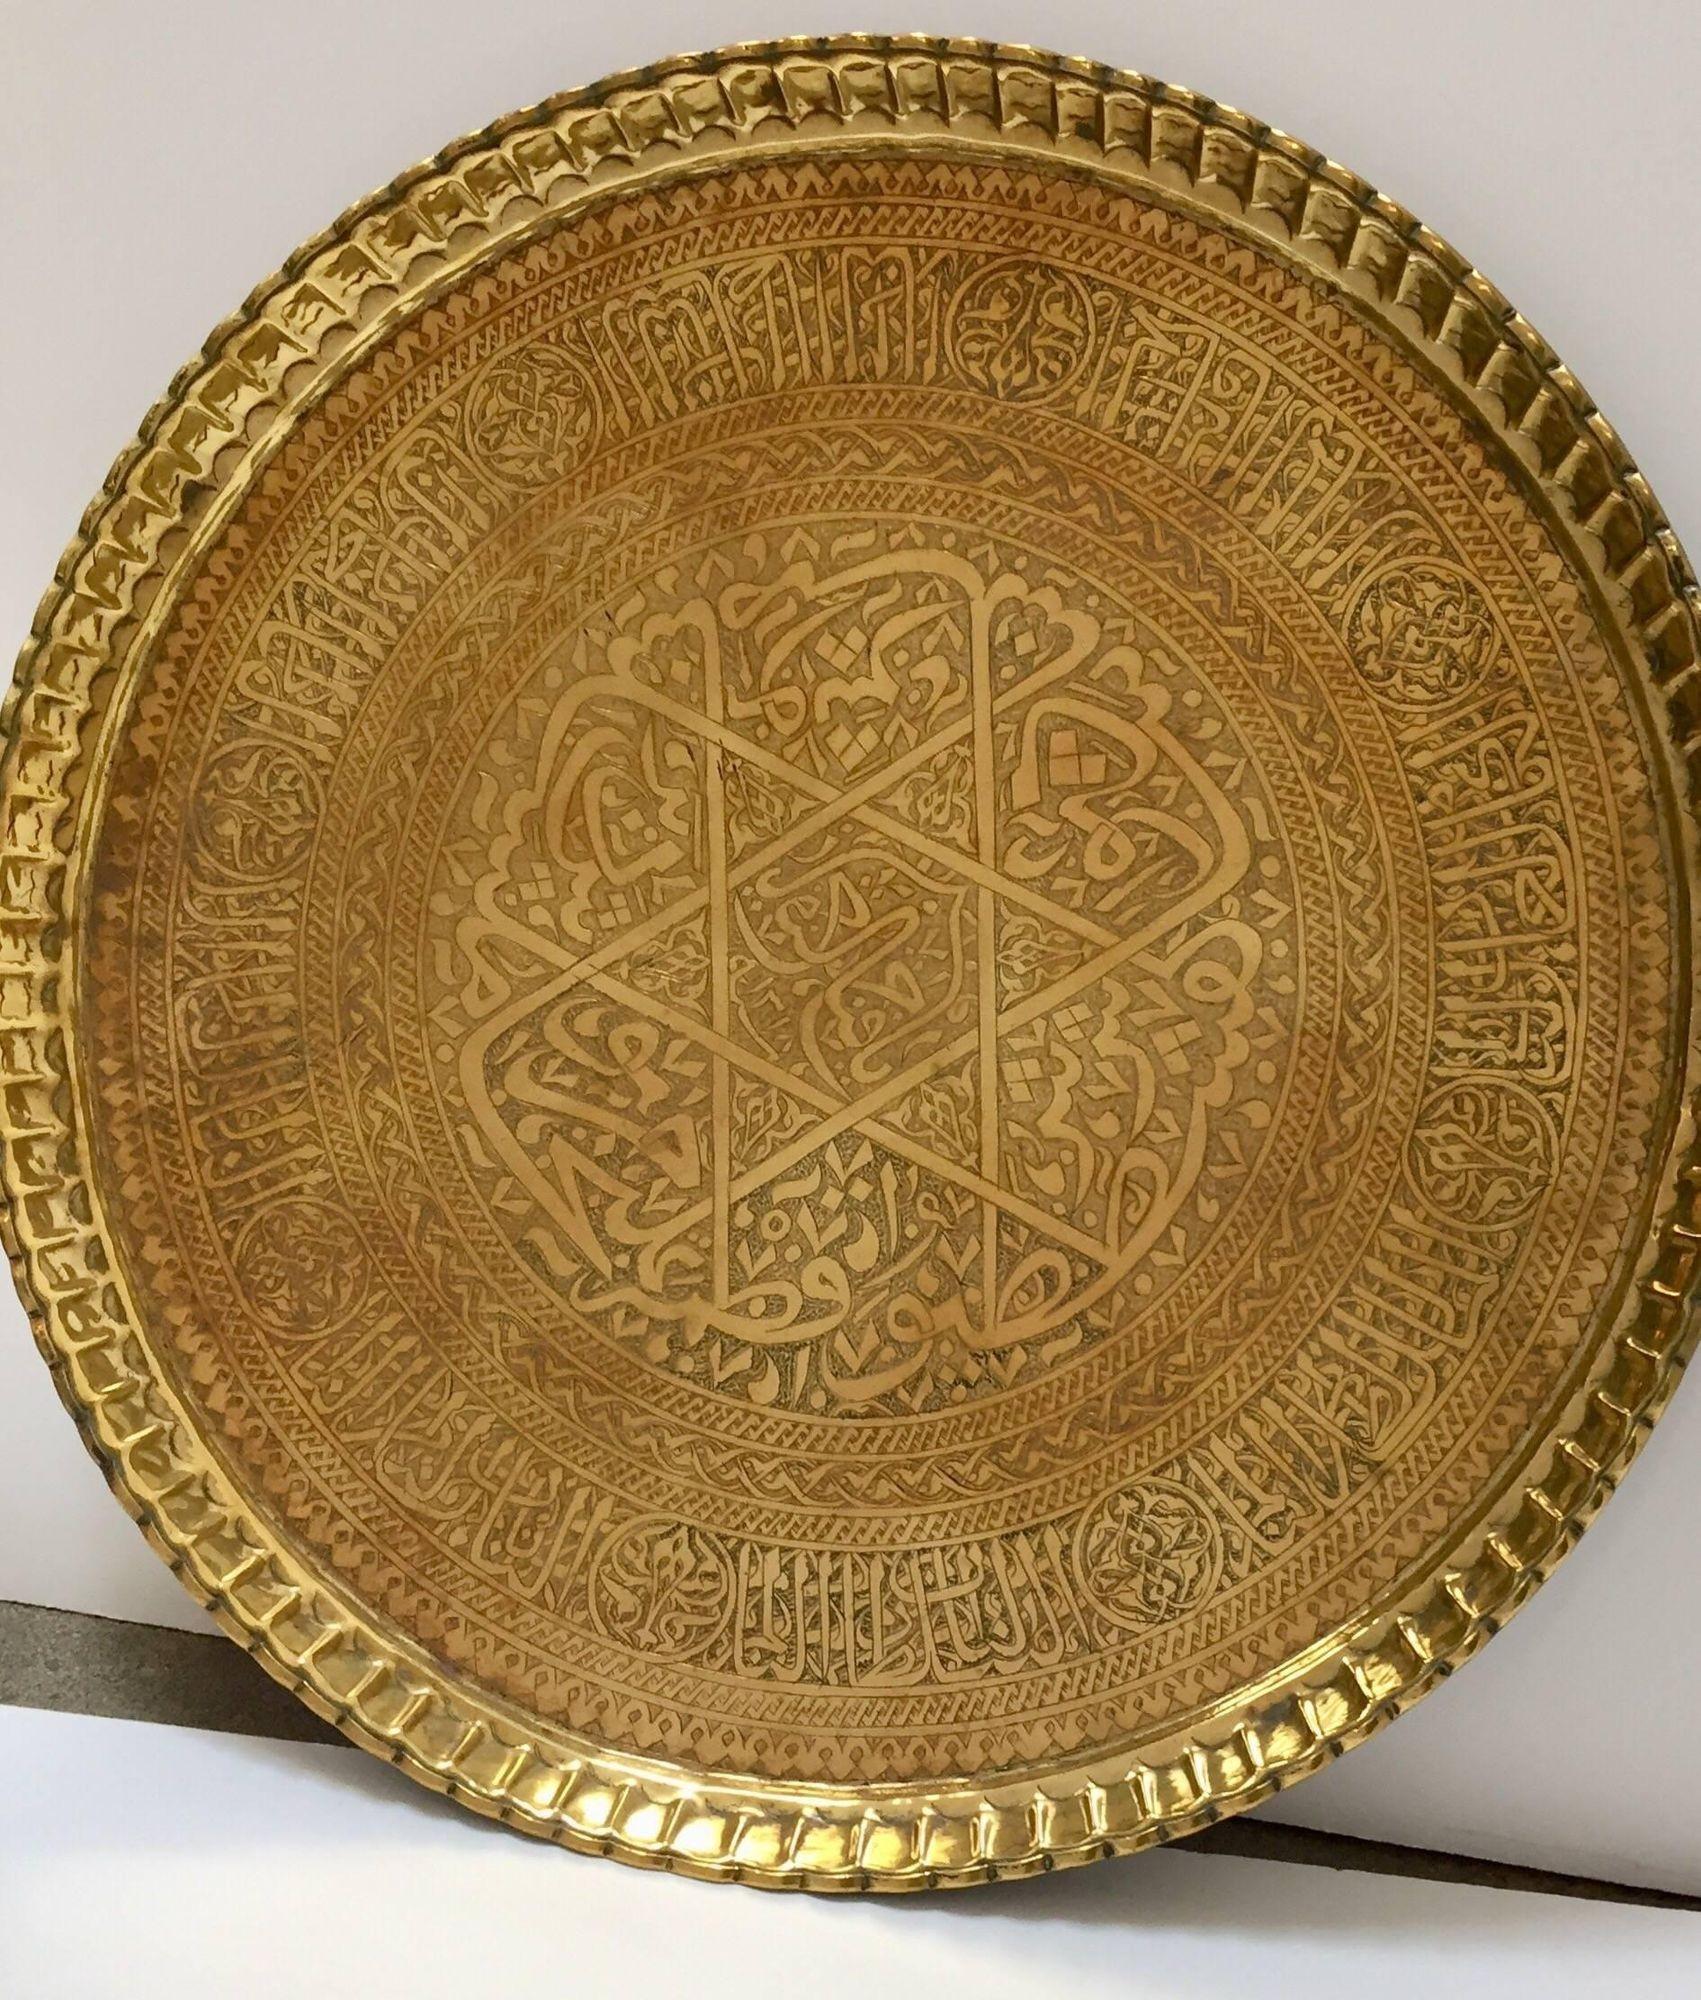 Large fine antique 19th century decorative round brass tray, serving platter.Rare Find, large brass tray 22